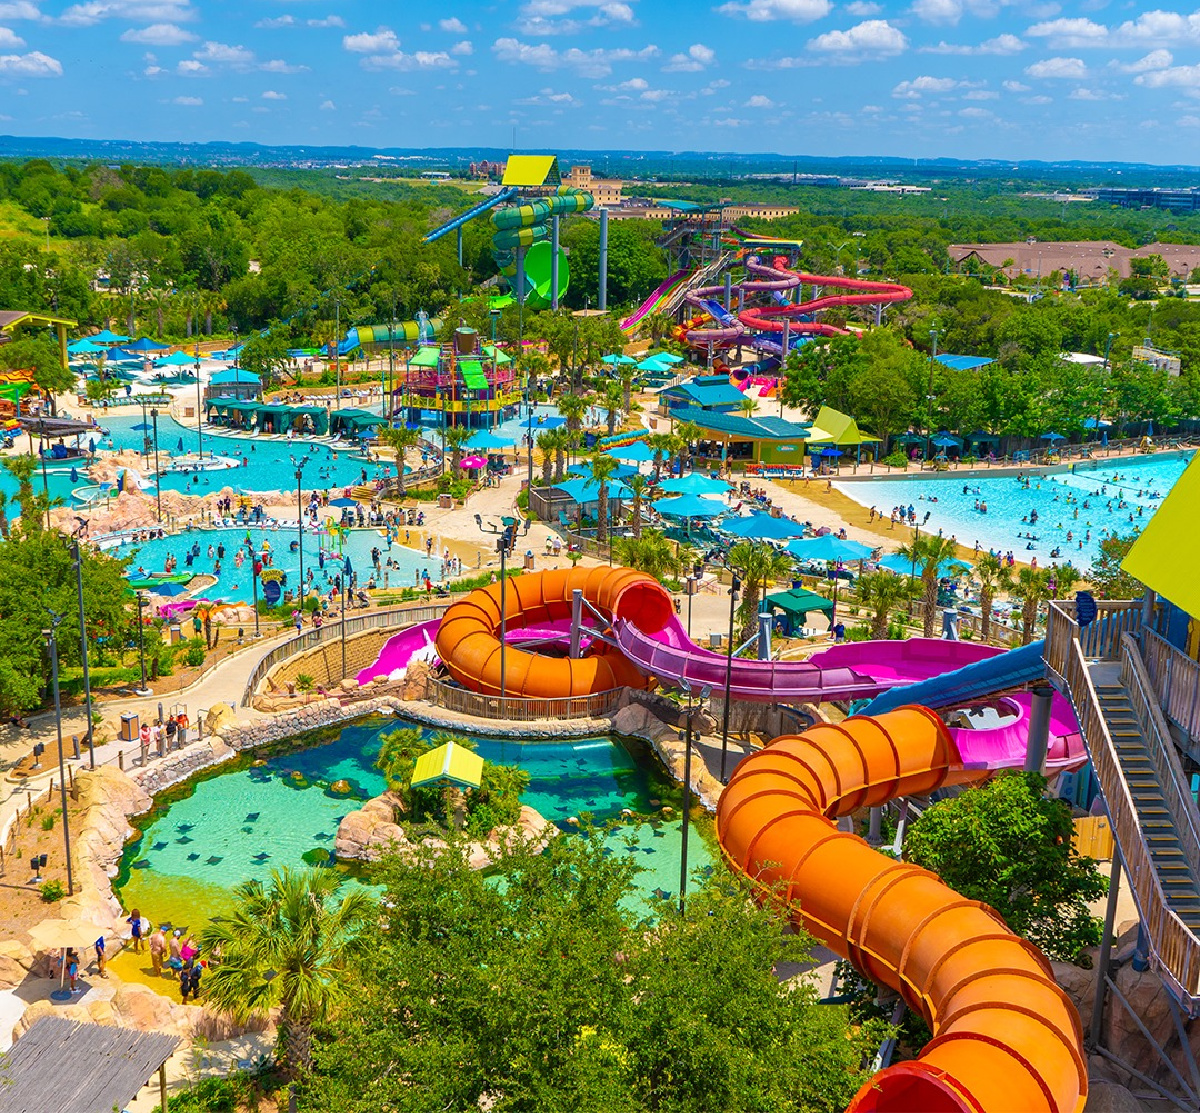 The Aquatica San Antonio park which which offers free SeaWorld military tickets through the waves of honor program